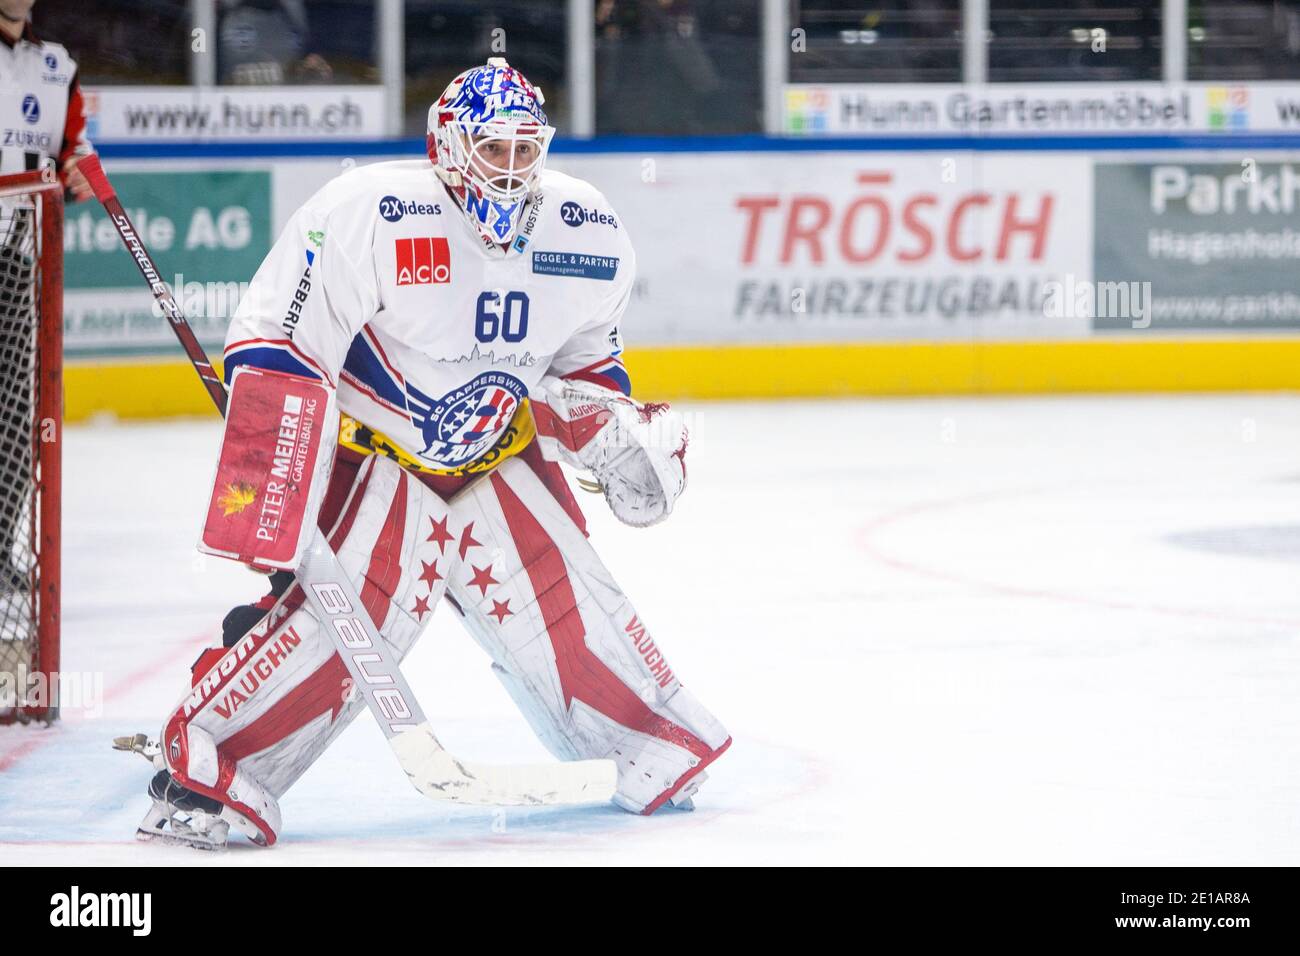 05.01.2021, Zurich, Hallenstadion, National League: ZSC Lions - SC Rapperswil-Jona Lakers, # 60 goalkeeper Melvin Nyffeler (Lakers) new in the game for # 51 goalkeeper Noel Bader (Lakers) Stock Photo